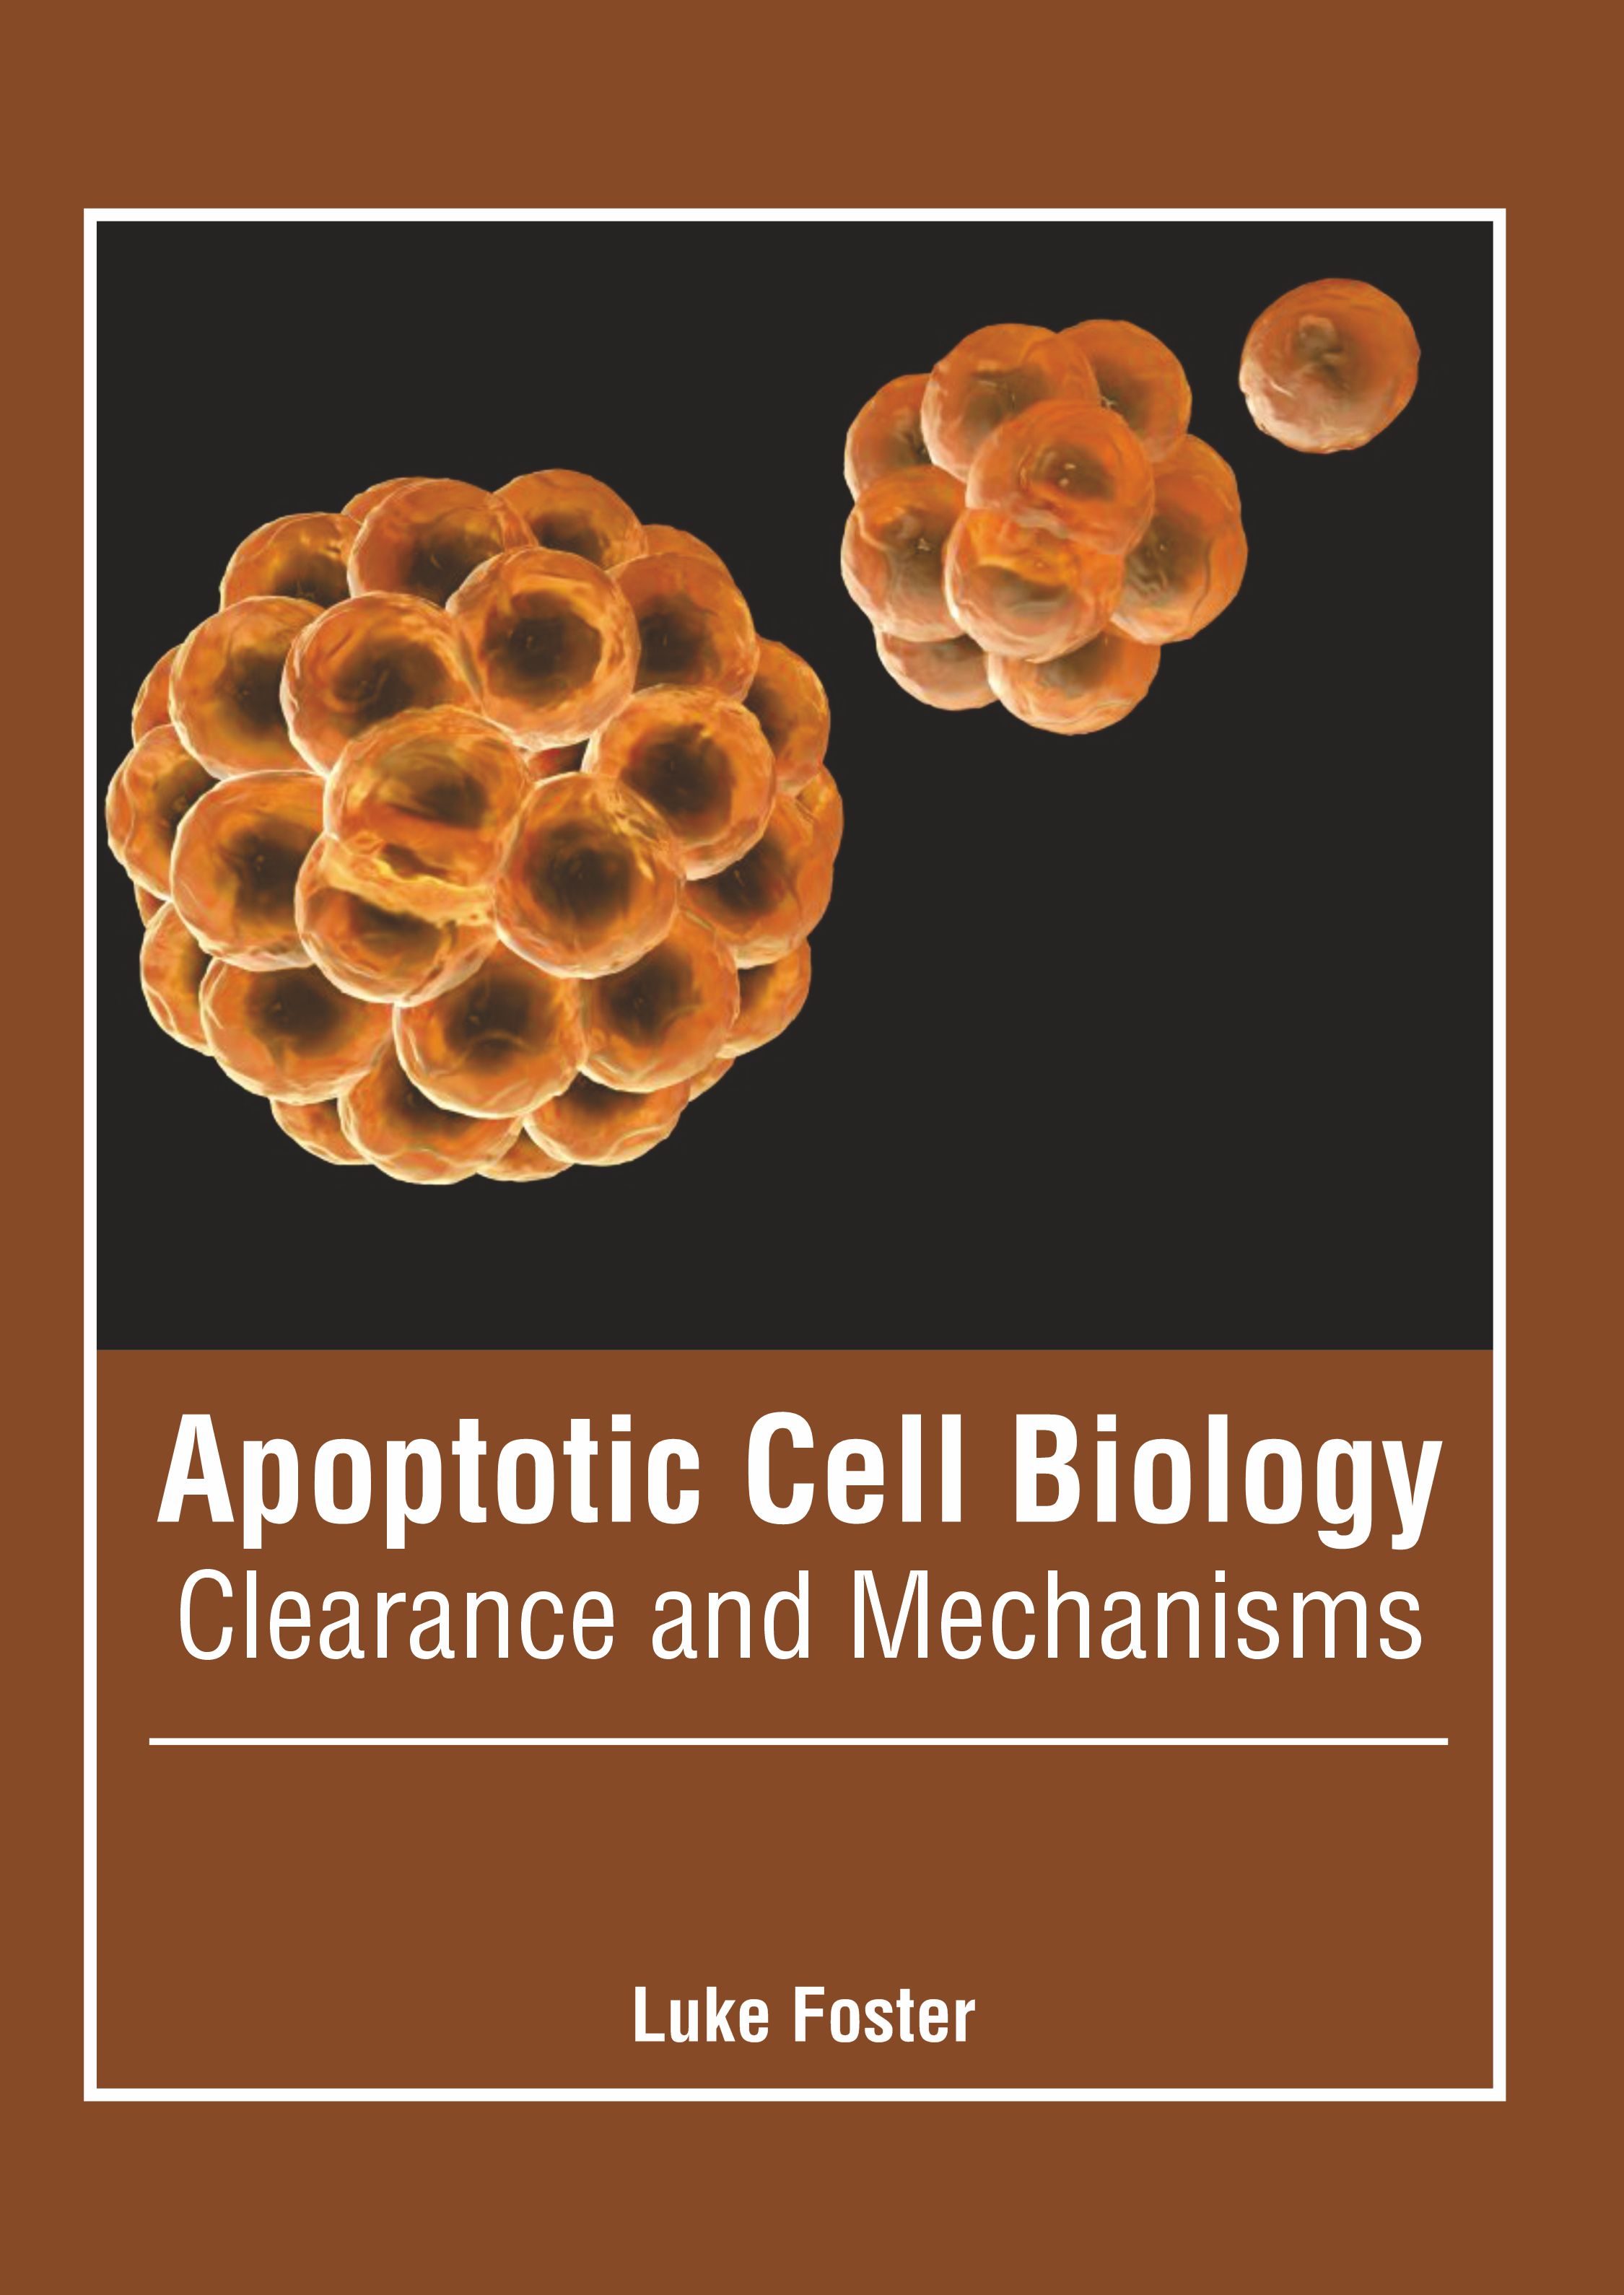 

medical-reference-books/cell-biology/calcium-signaling-in-biology-and-medicine-9781639270415